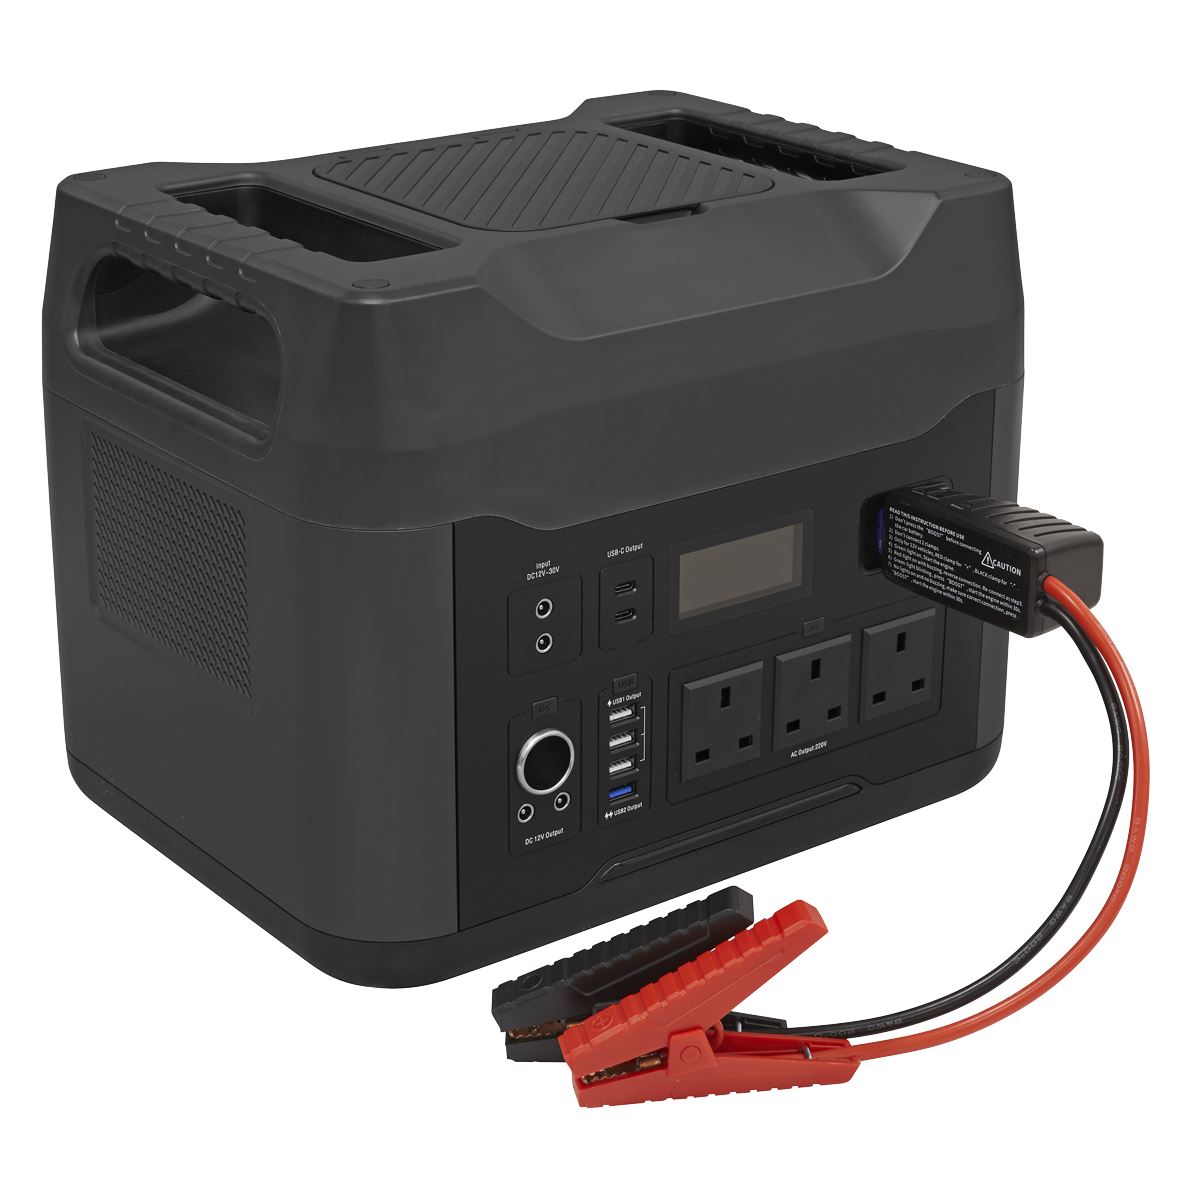 Sealey Portable Power Station 2200W